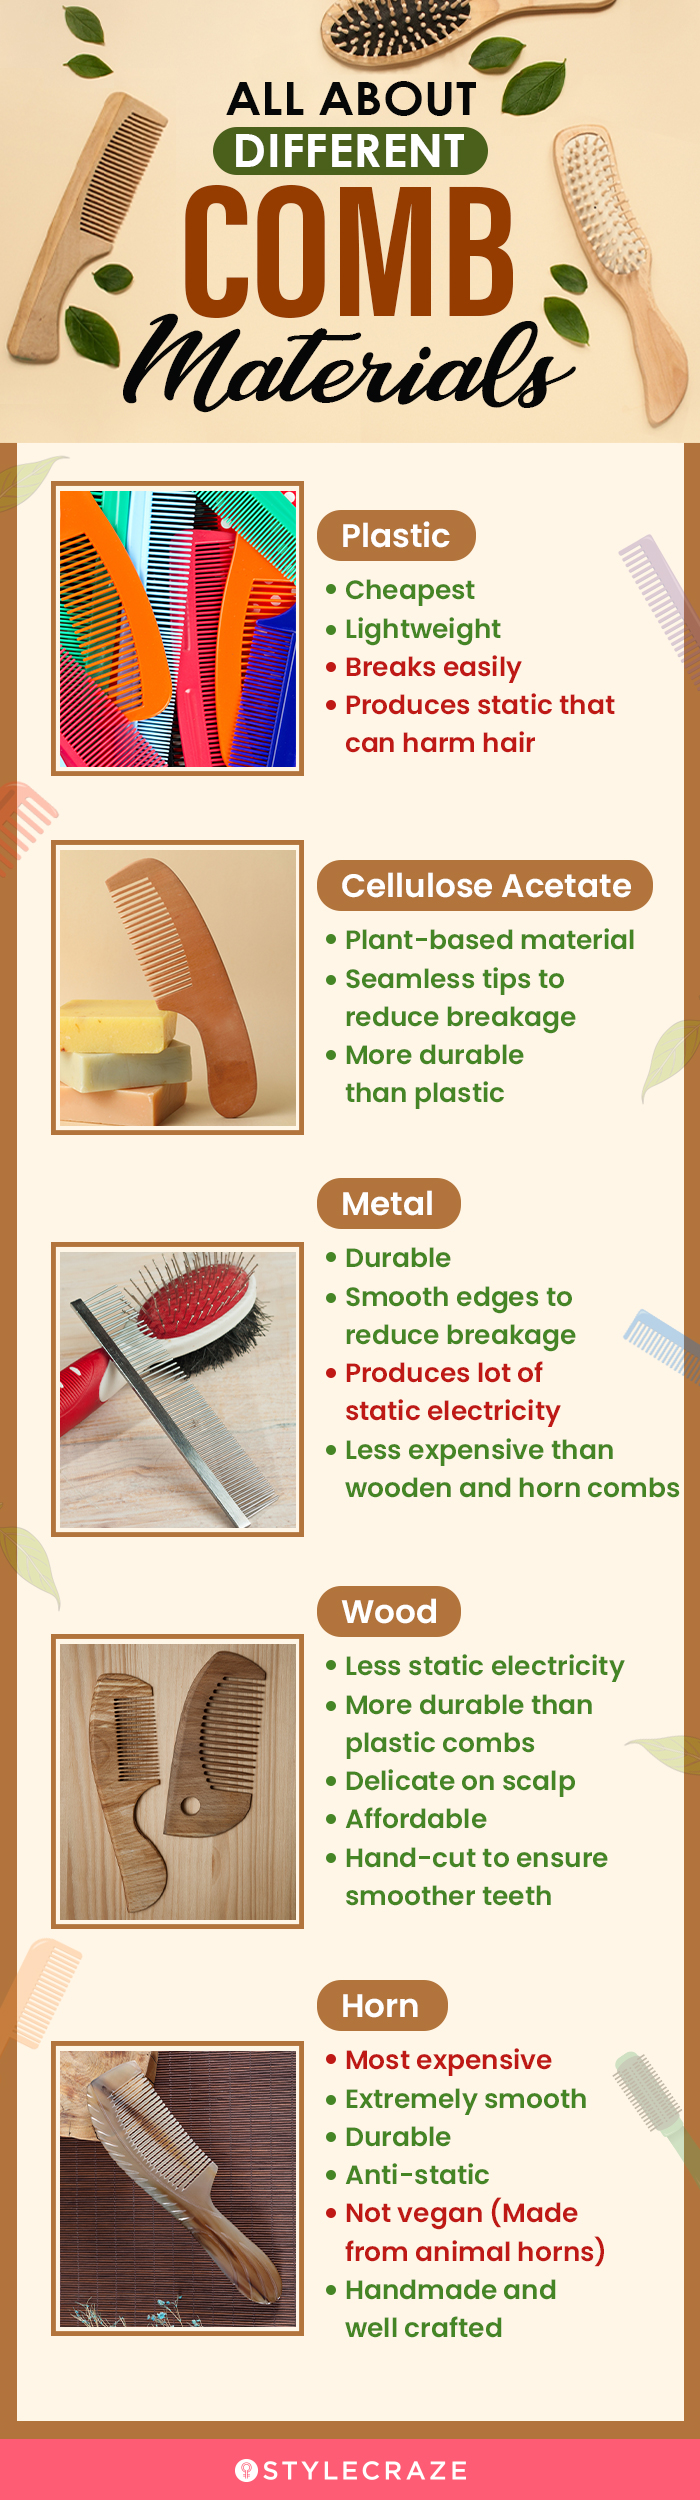 all about different comb materials(infographic)